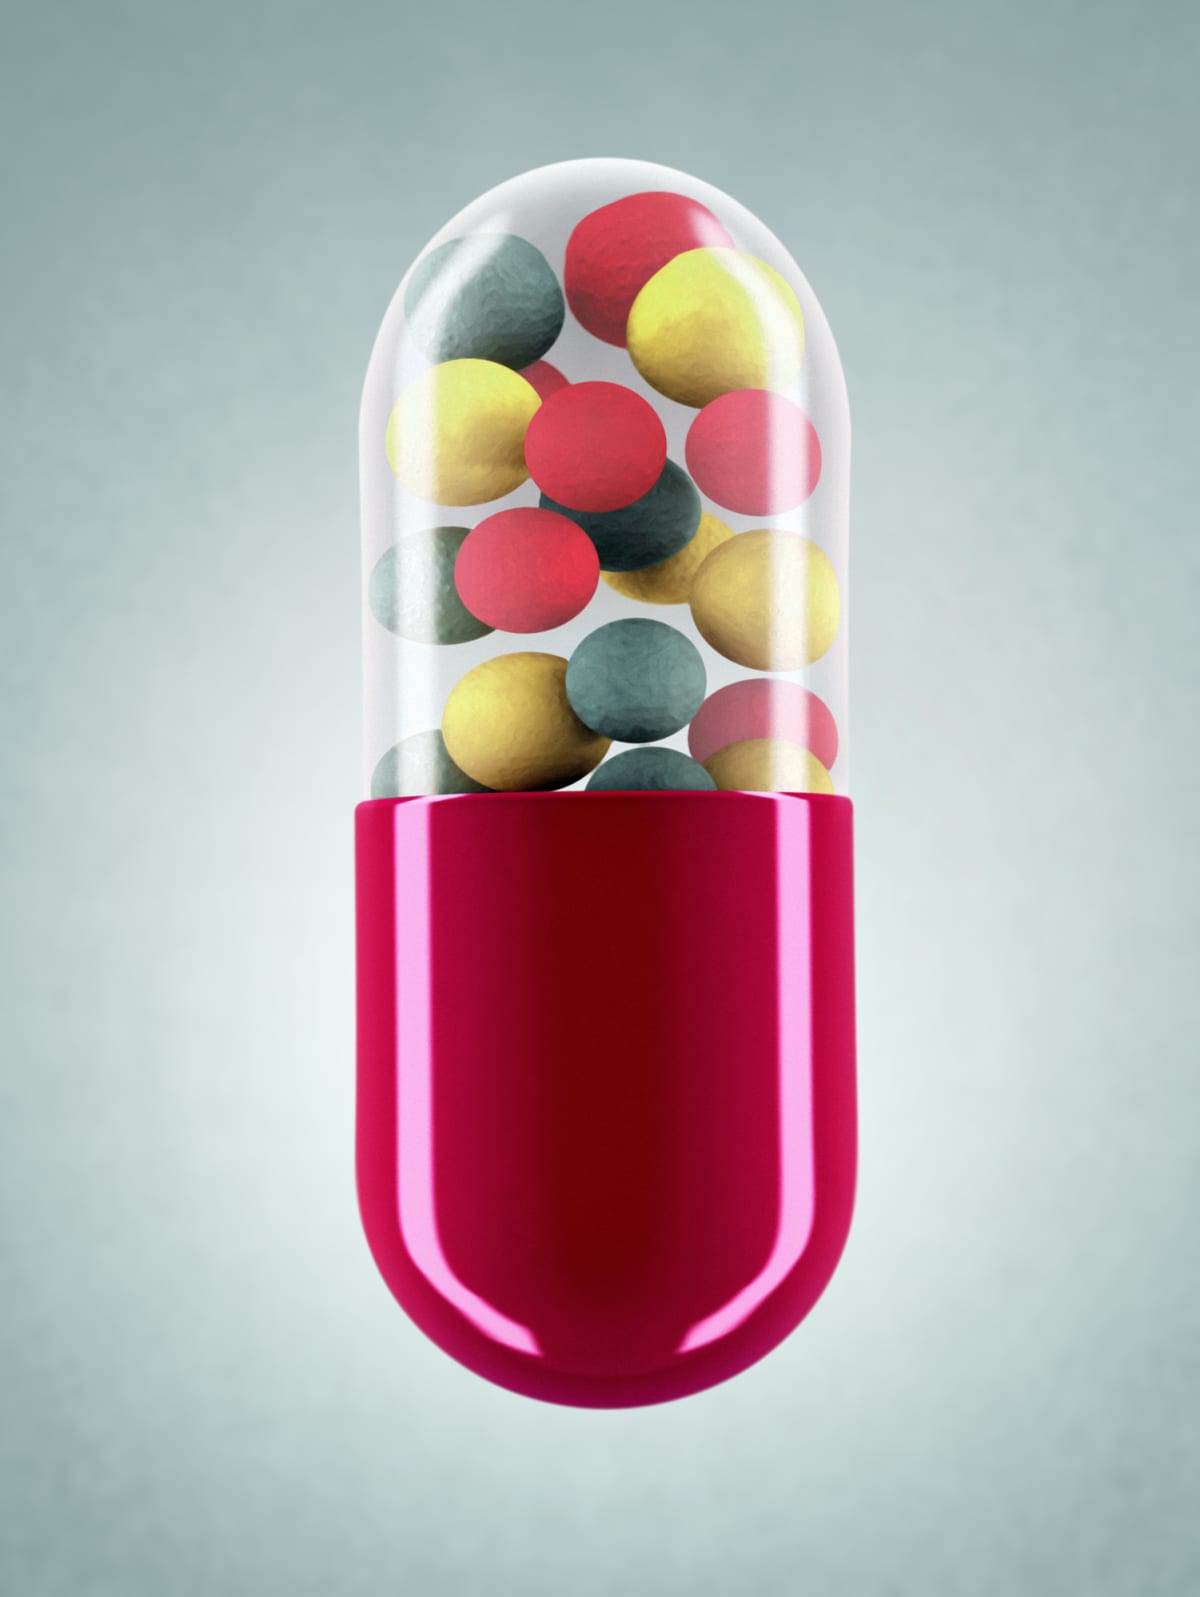 A pill capsule floats against a blue background. The red pill contains a variety of colourful powerful drugs.